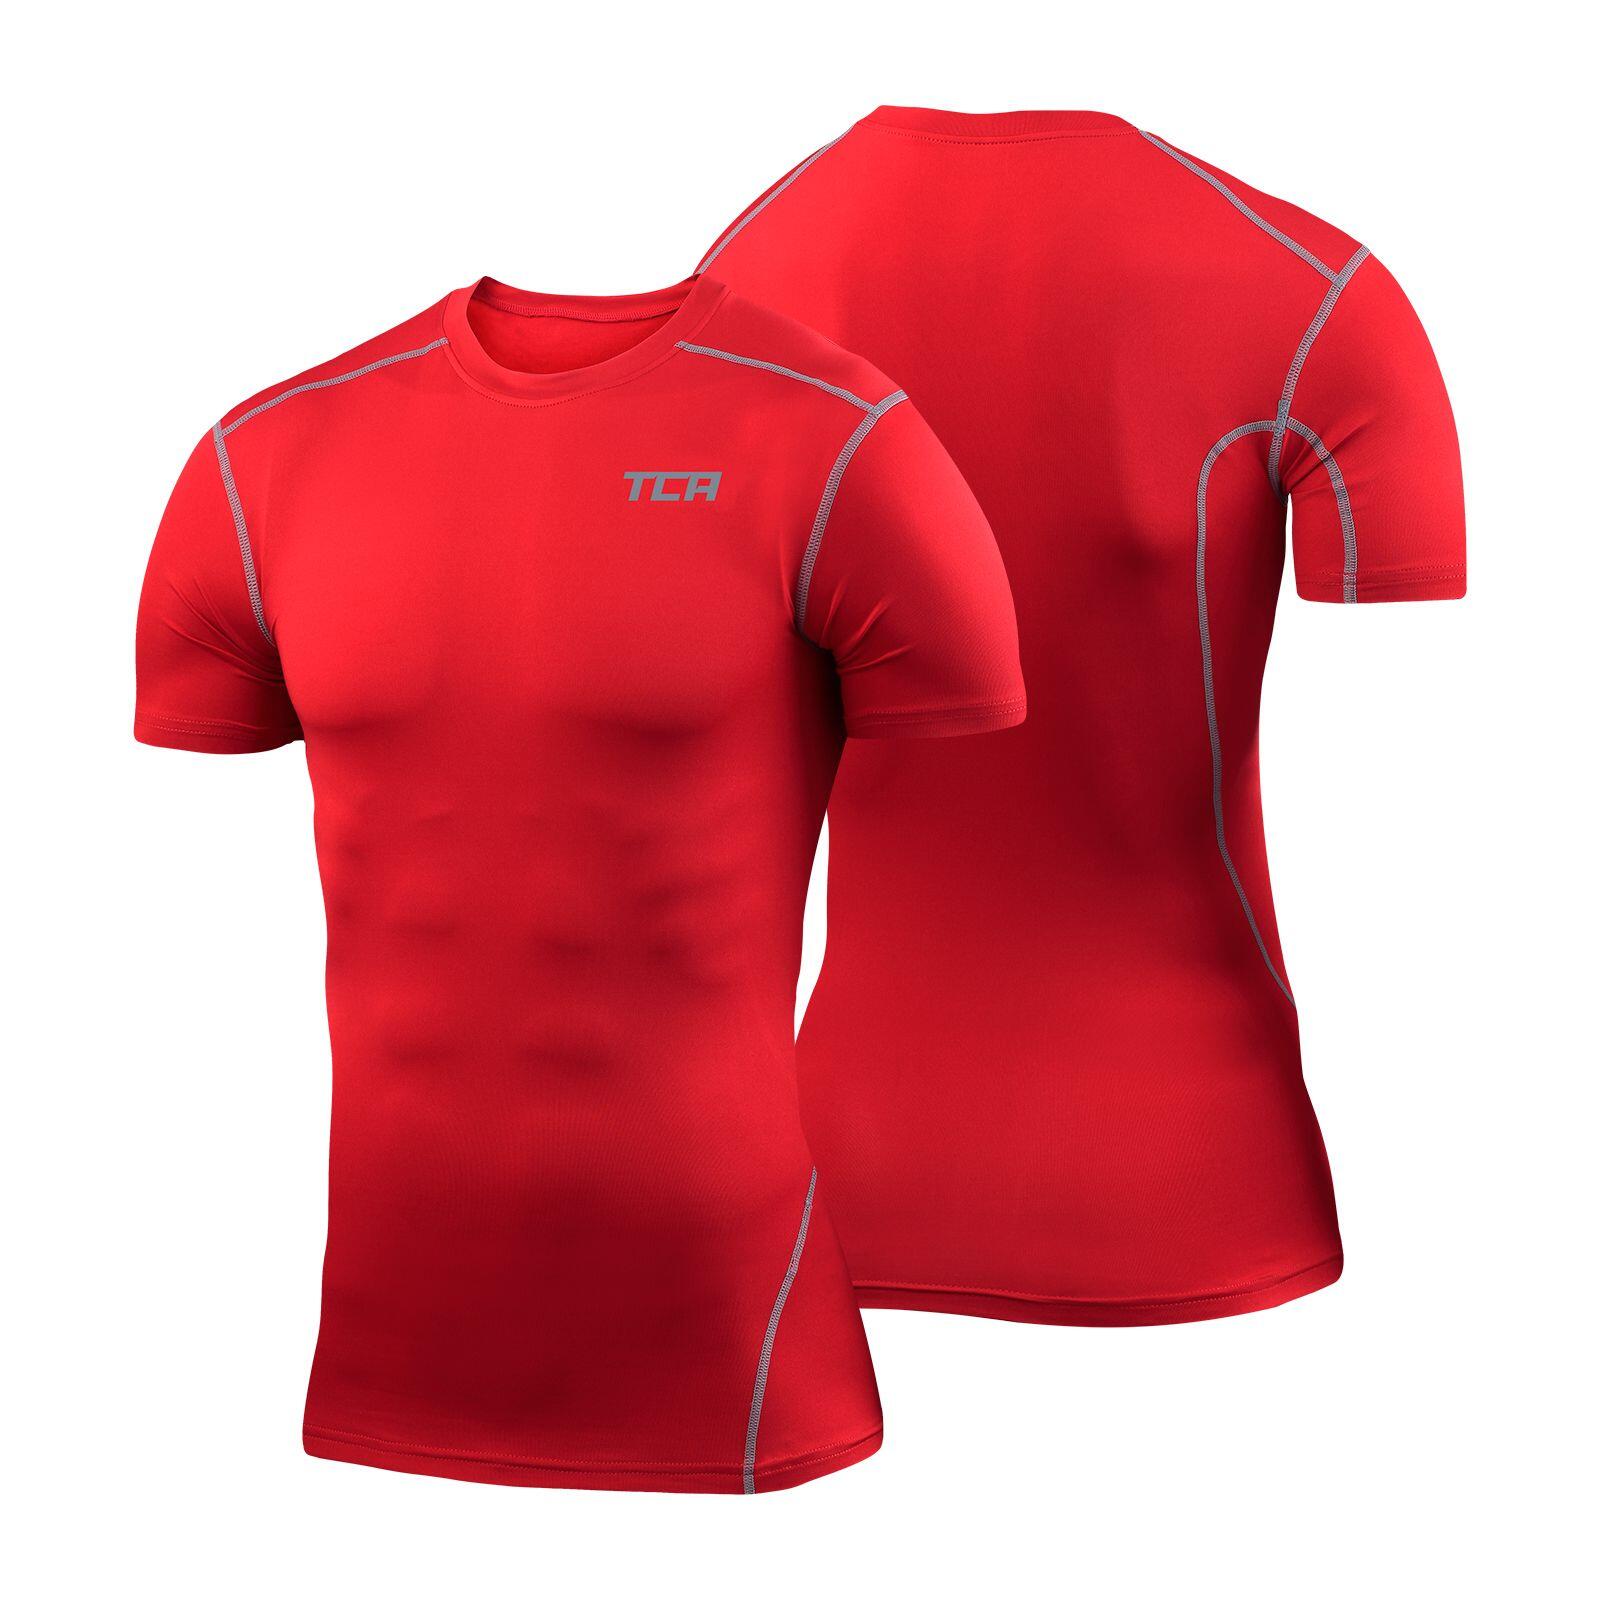 Men's Performance Base Layer Compression T-shirt - Team Red 3/3